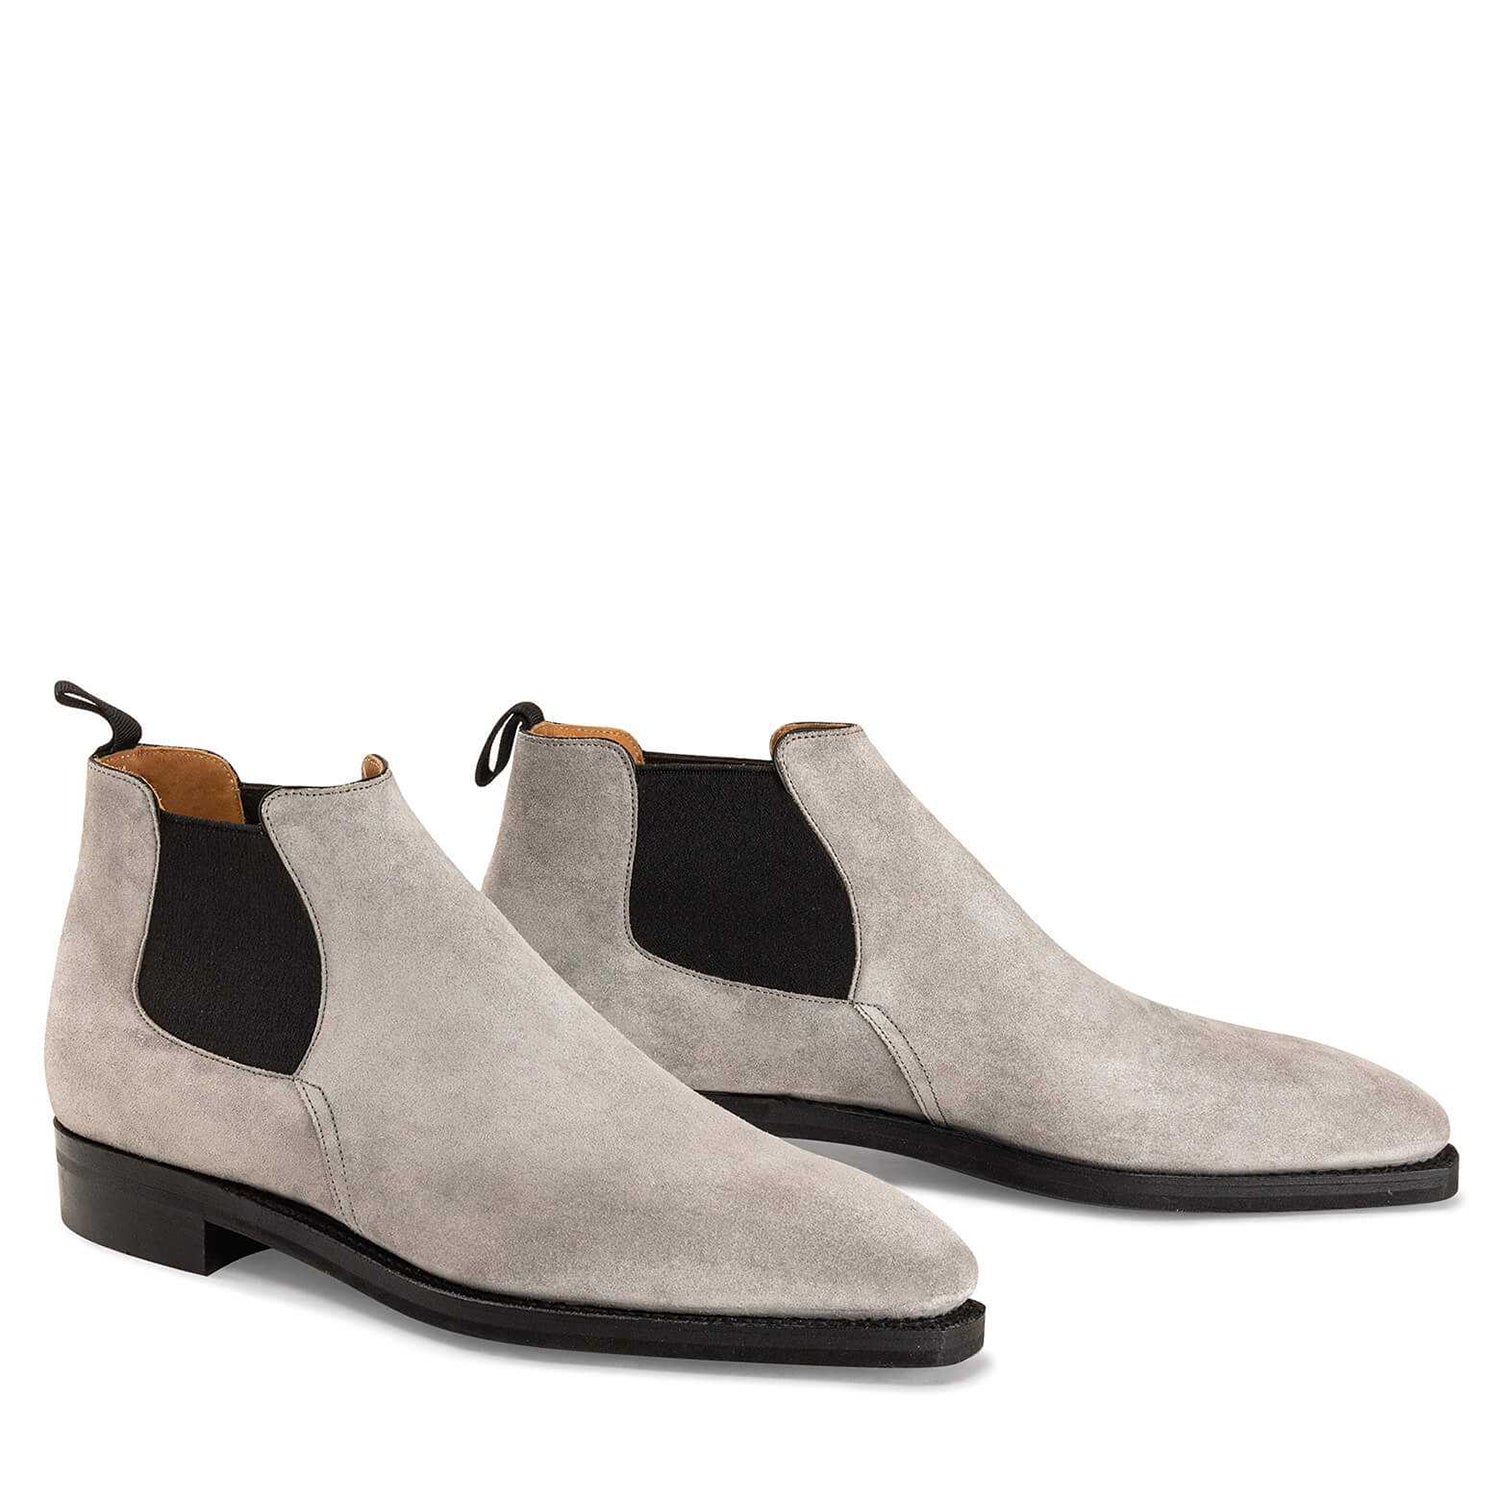 GREY BOOTS SUEDE CALF LEATHER